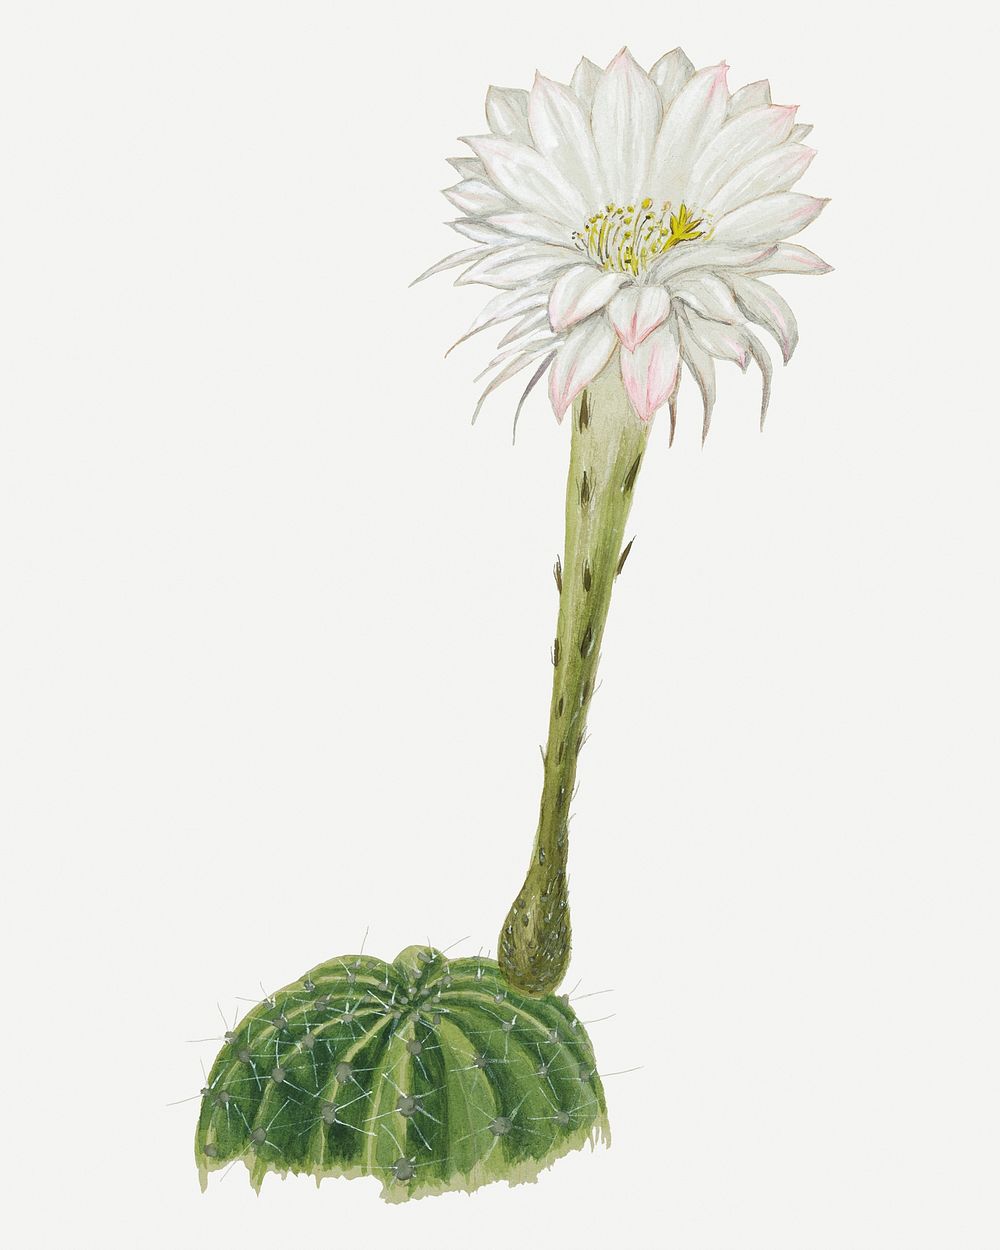 Easter lily cactus drawing, aesthetic vintage flower illustration